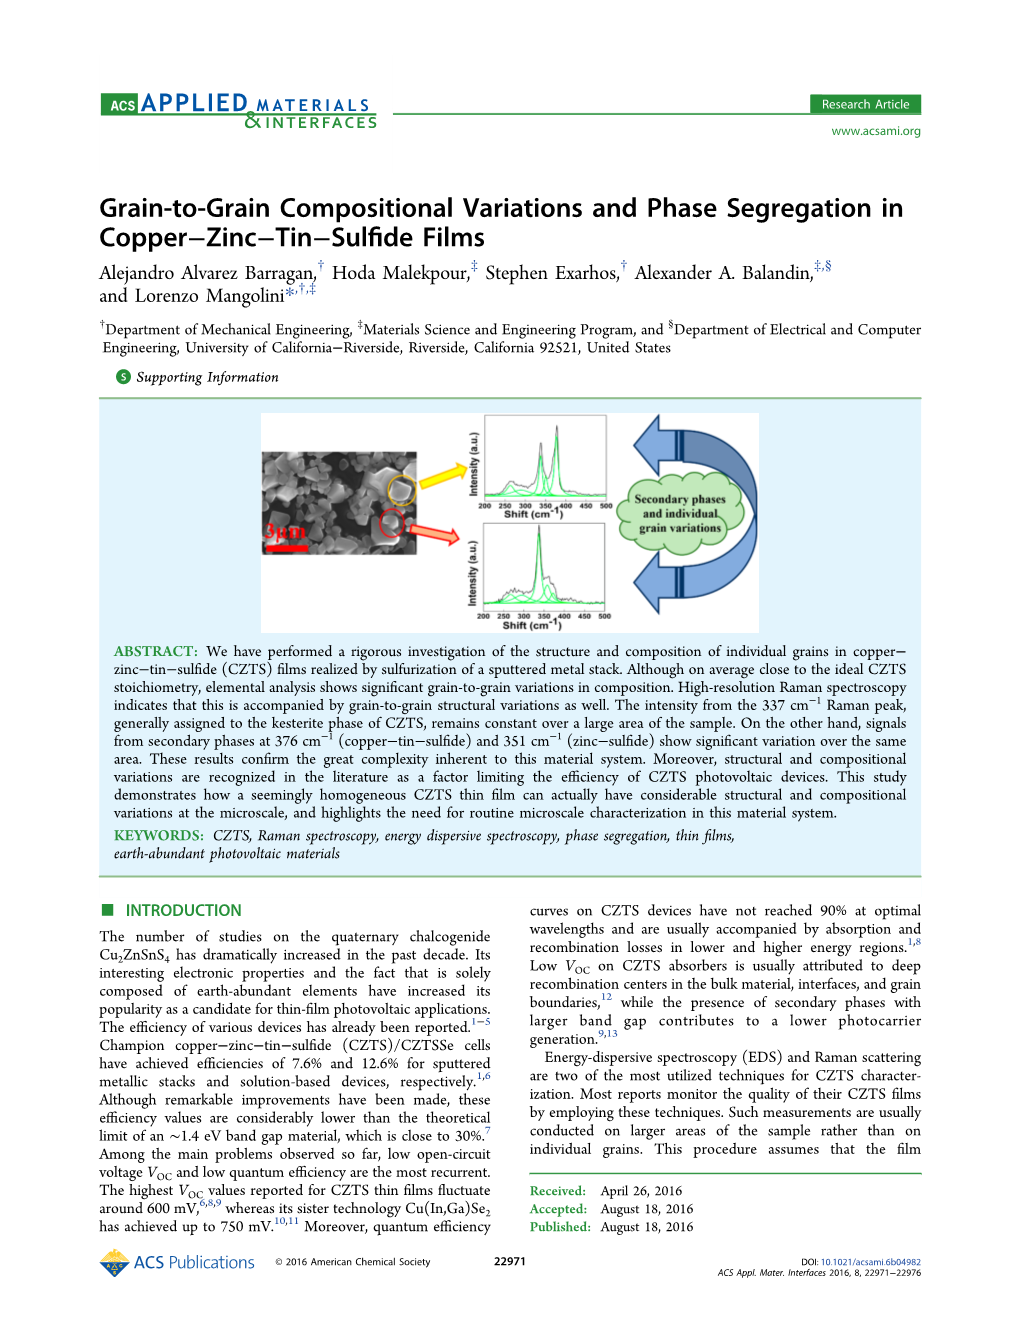 Grain-To-Grain Compositional Variations and Phase Segregation